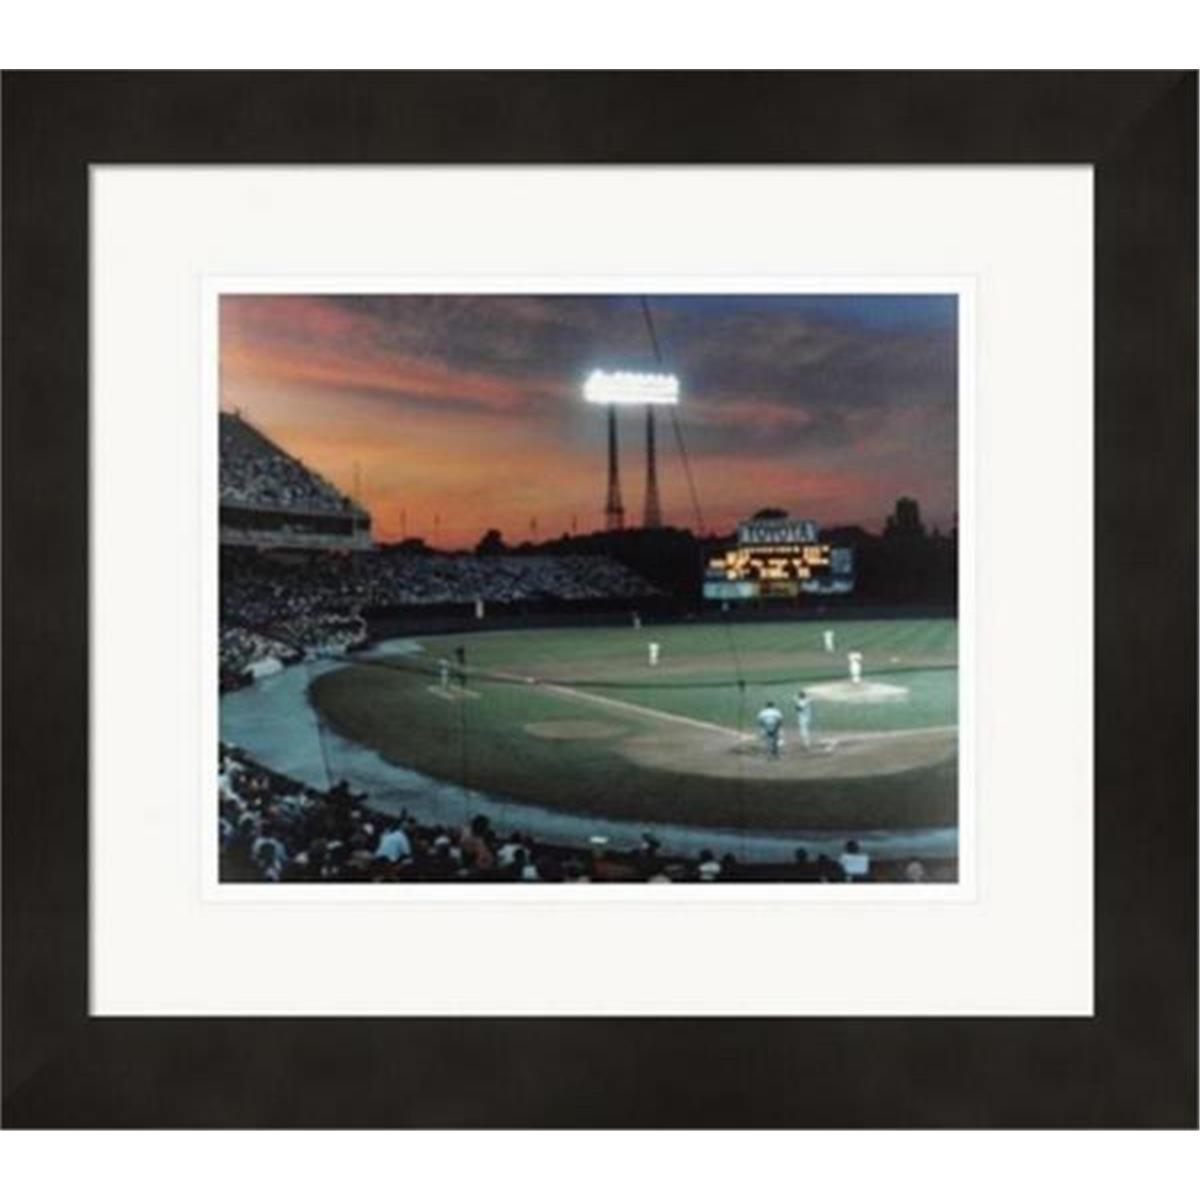 Picture of Autograph Warehouse 584087 Memorial Stadium Matted Framed 8 x 10 in. Photo - Baltimore Orioles